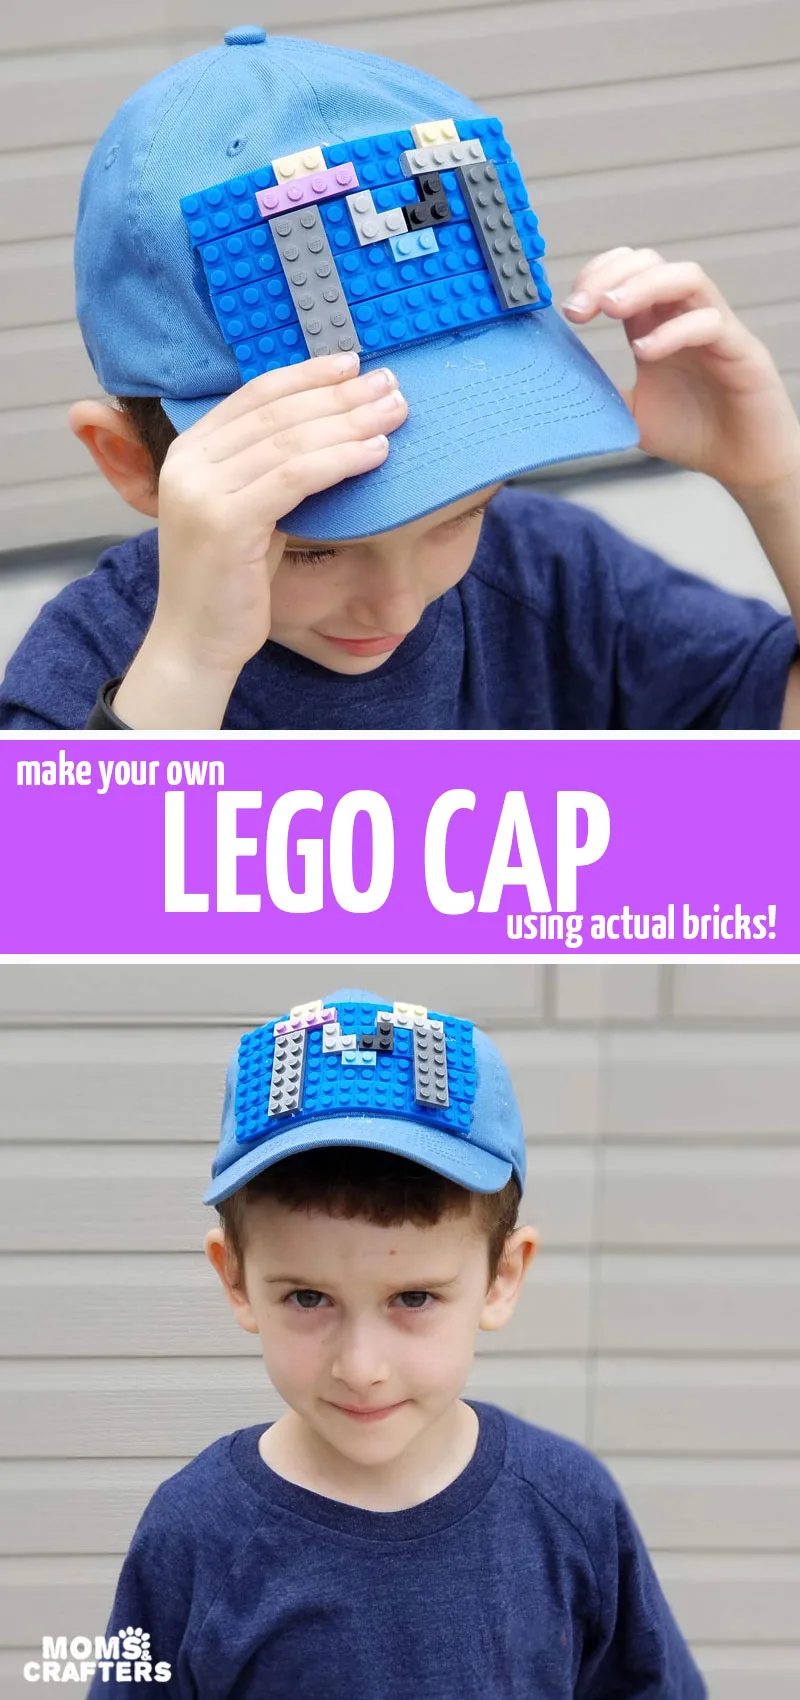 Click to learn how to make the coolest LEGO cap ever! This fun DIY embellished baseball cap is a wonderful summer craft for teens and tweens - boys or girls! It has actual LEGO bricks on it, making it the coolest DIY accessory ever! #lego #diyfashion #crafts #teencraft